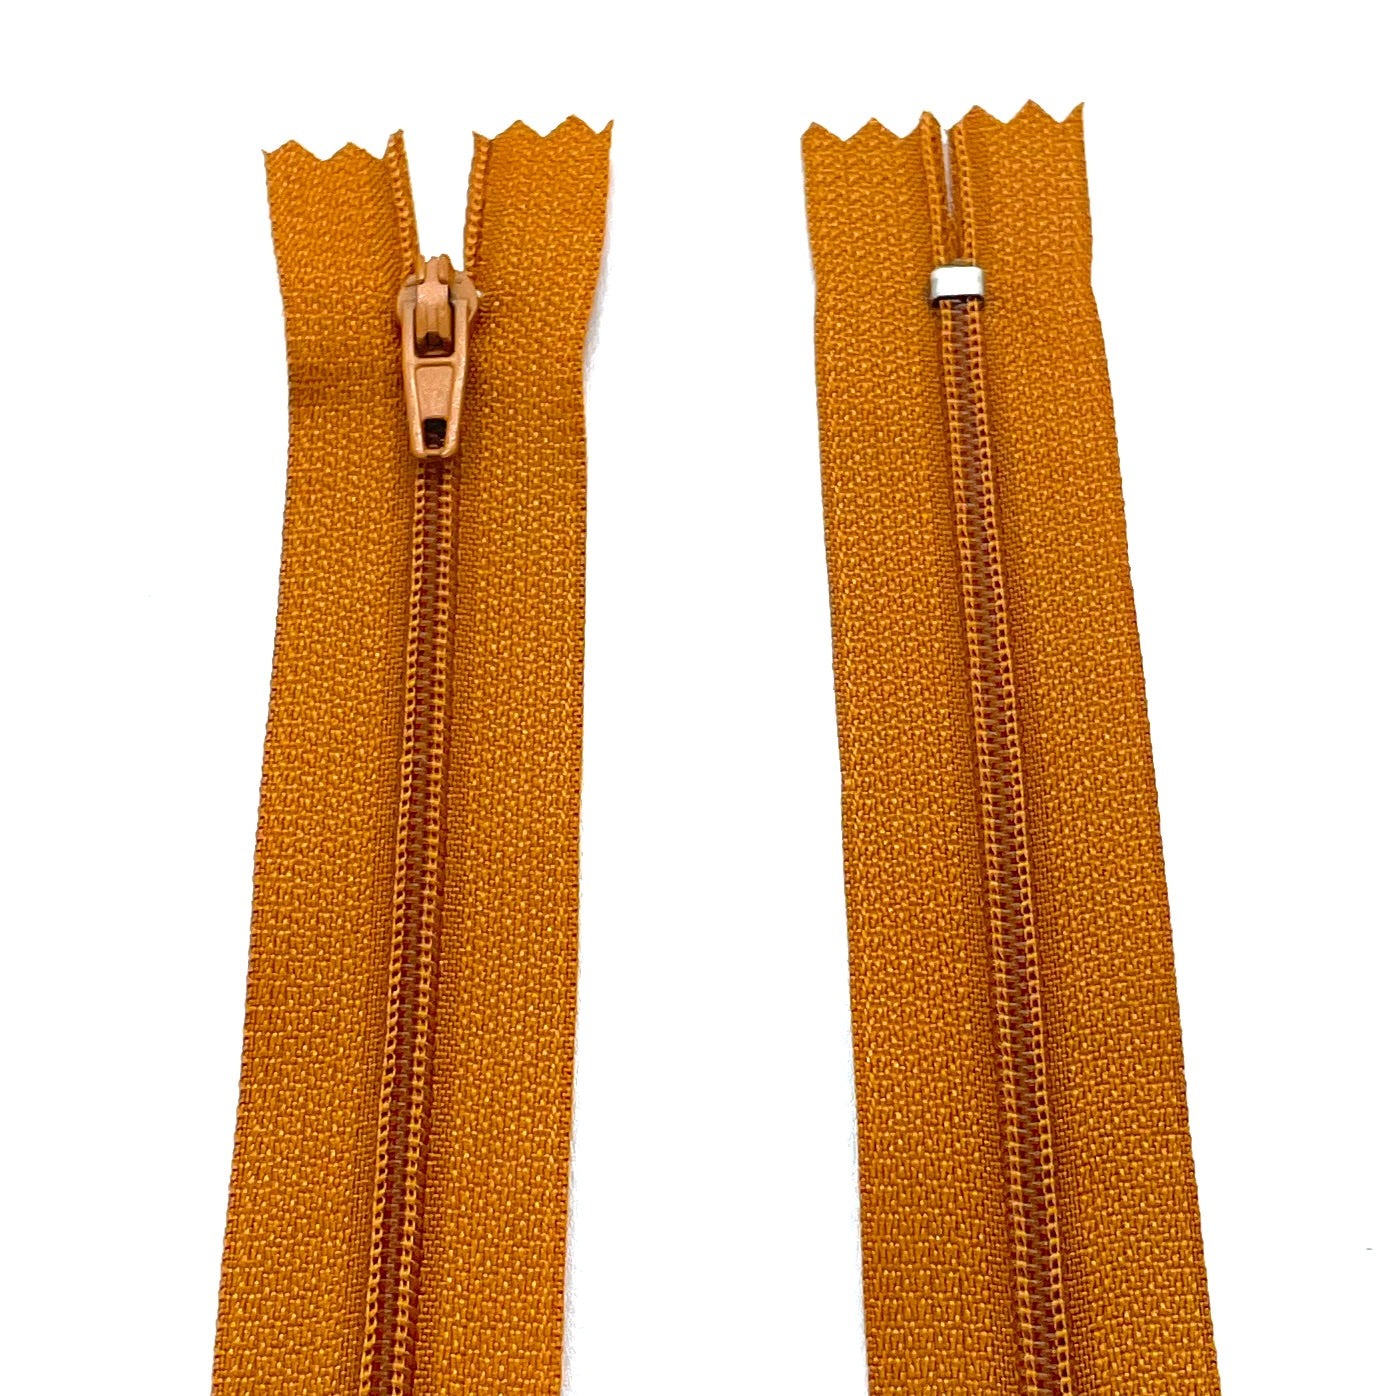 Photo of nylon zips available in 25 colors and 5 sizes. Excellent quality zippers for craft and dressmaking purposes. Perfect for dresses, skirts, trousers, bags, purses, cushions, and numerous other projects. So many possibilities, so little time!